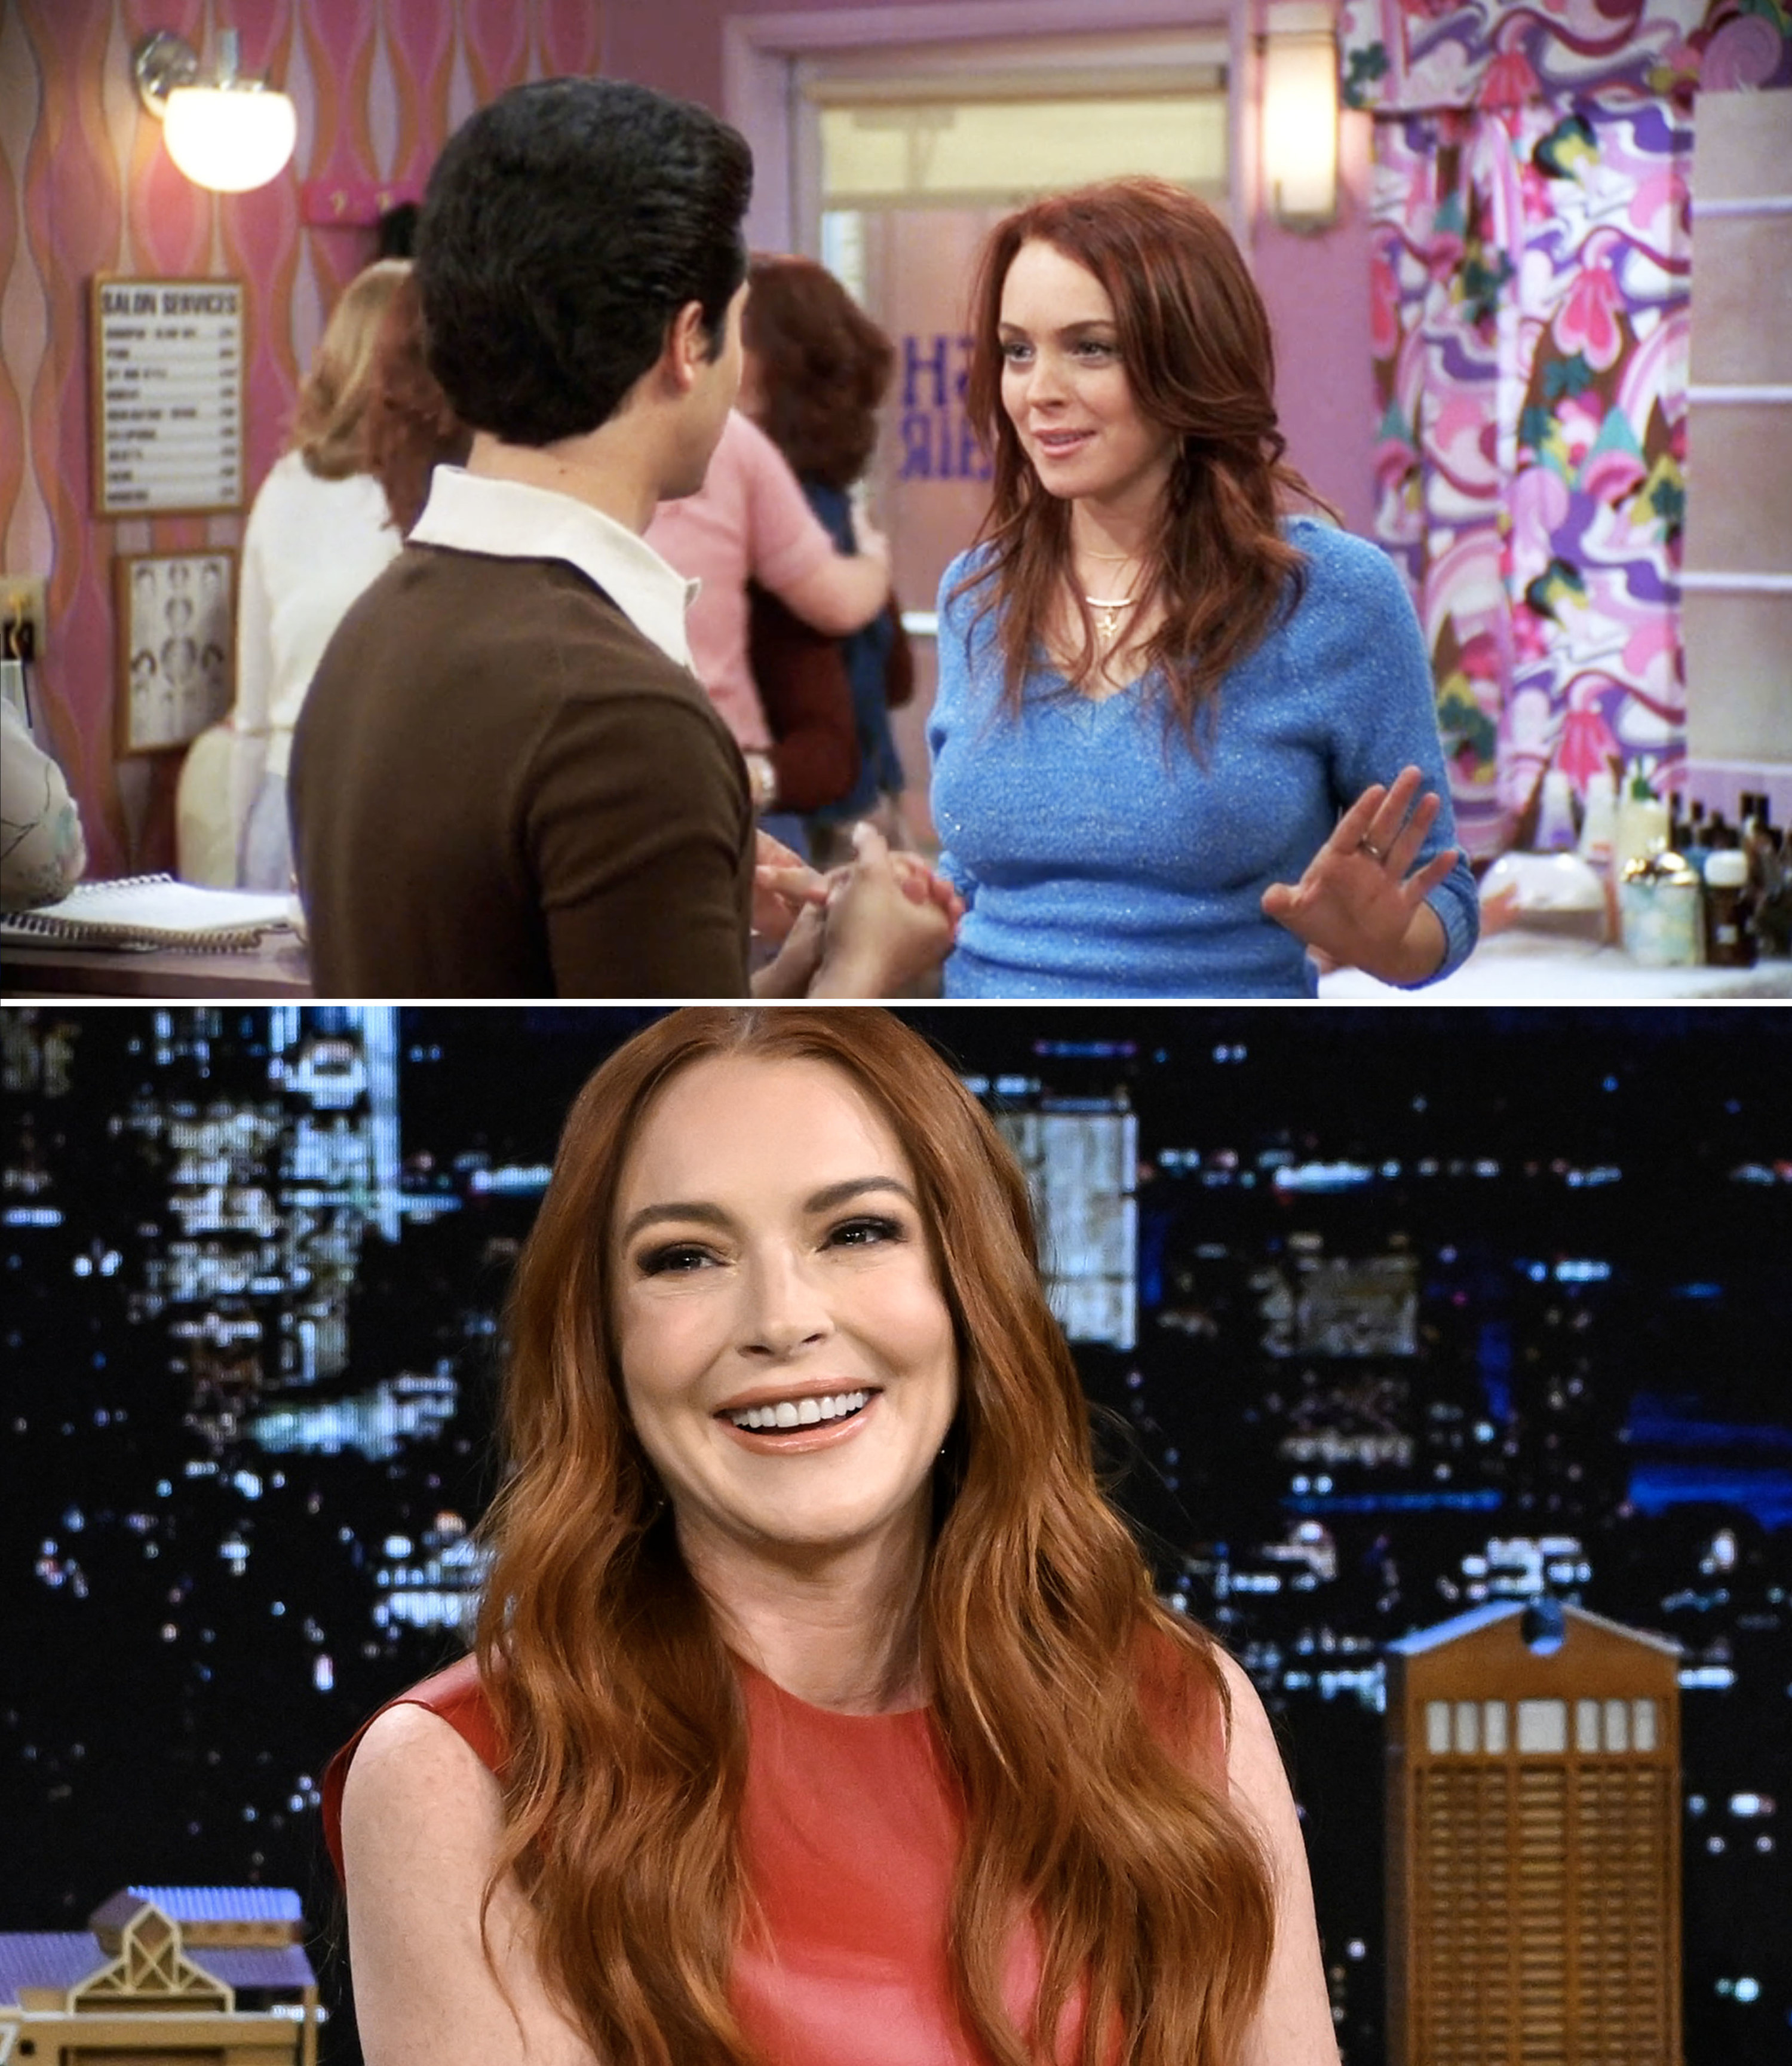 Danielle and Fez standing together, and Lindsay smiling on a talk show